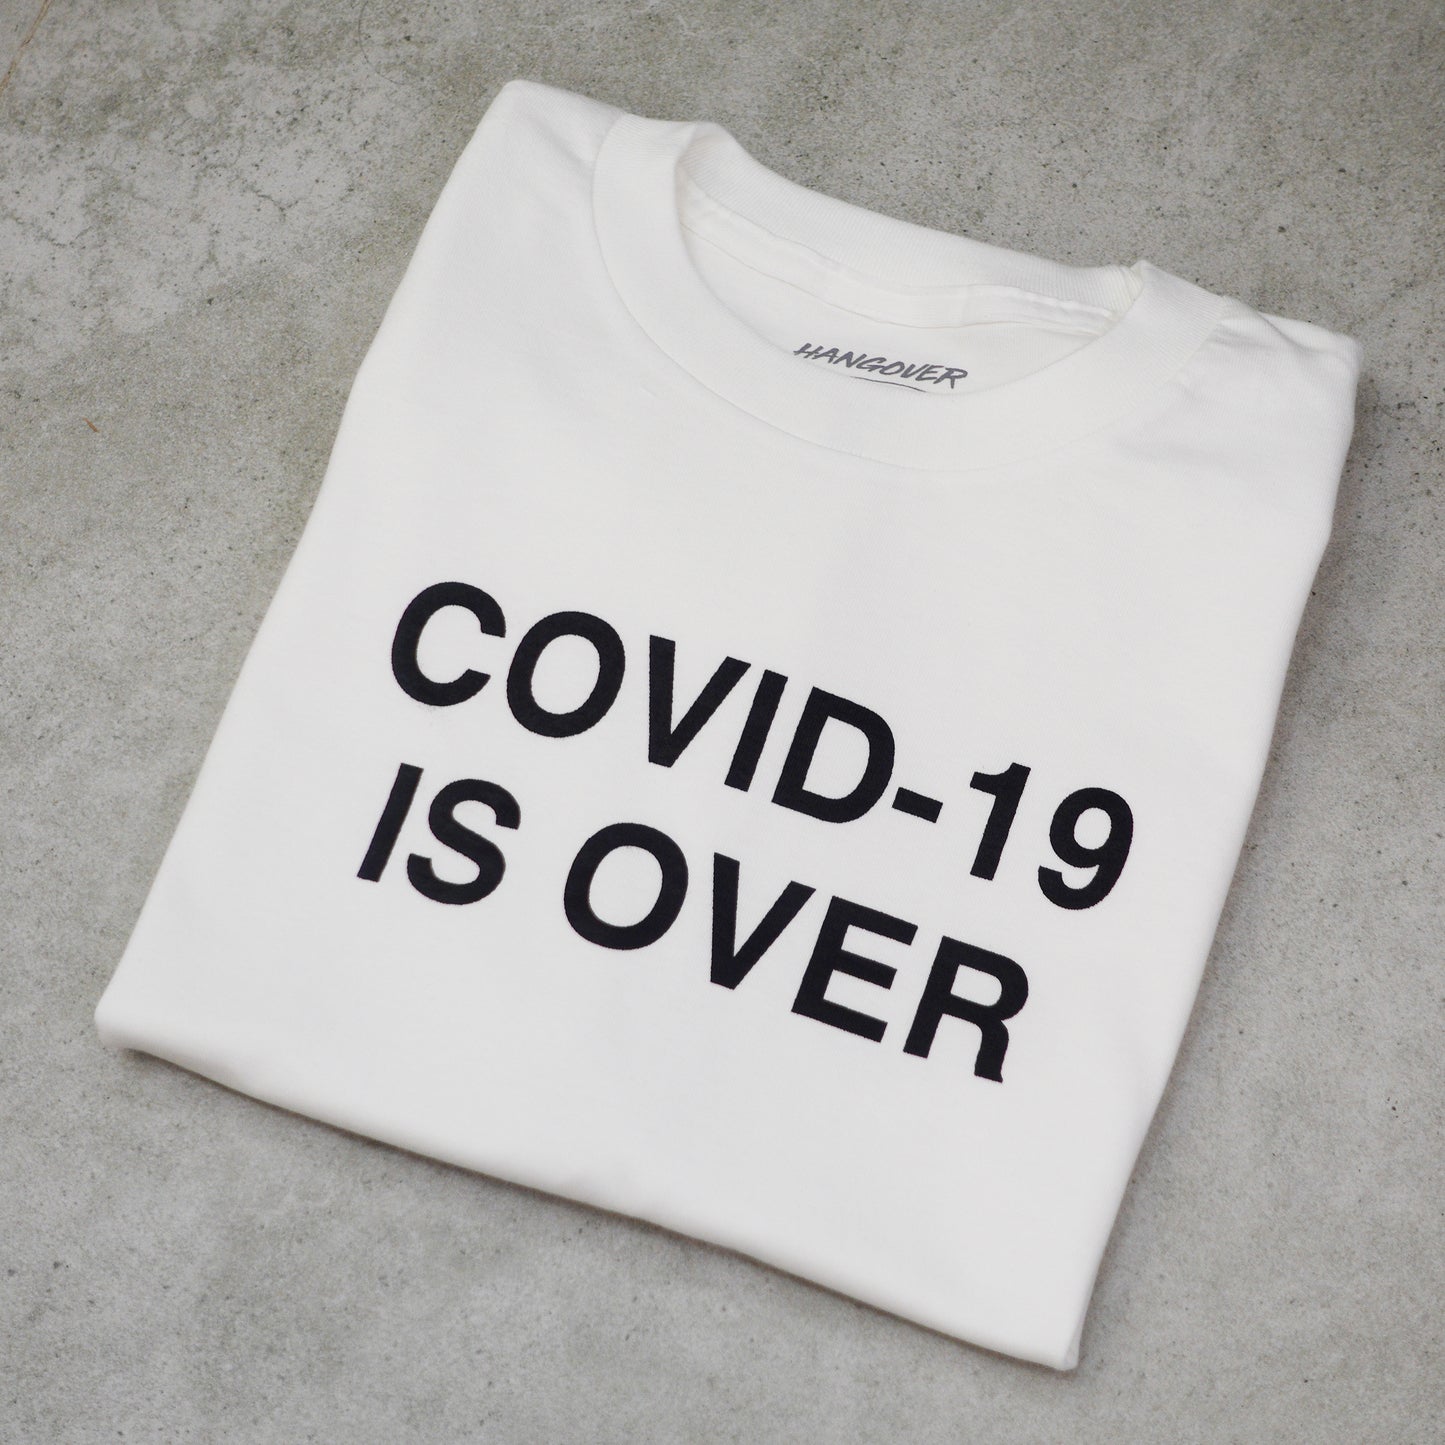 COVID-19 IS OVER - WHITE